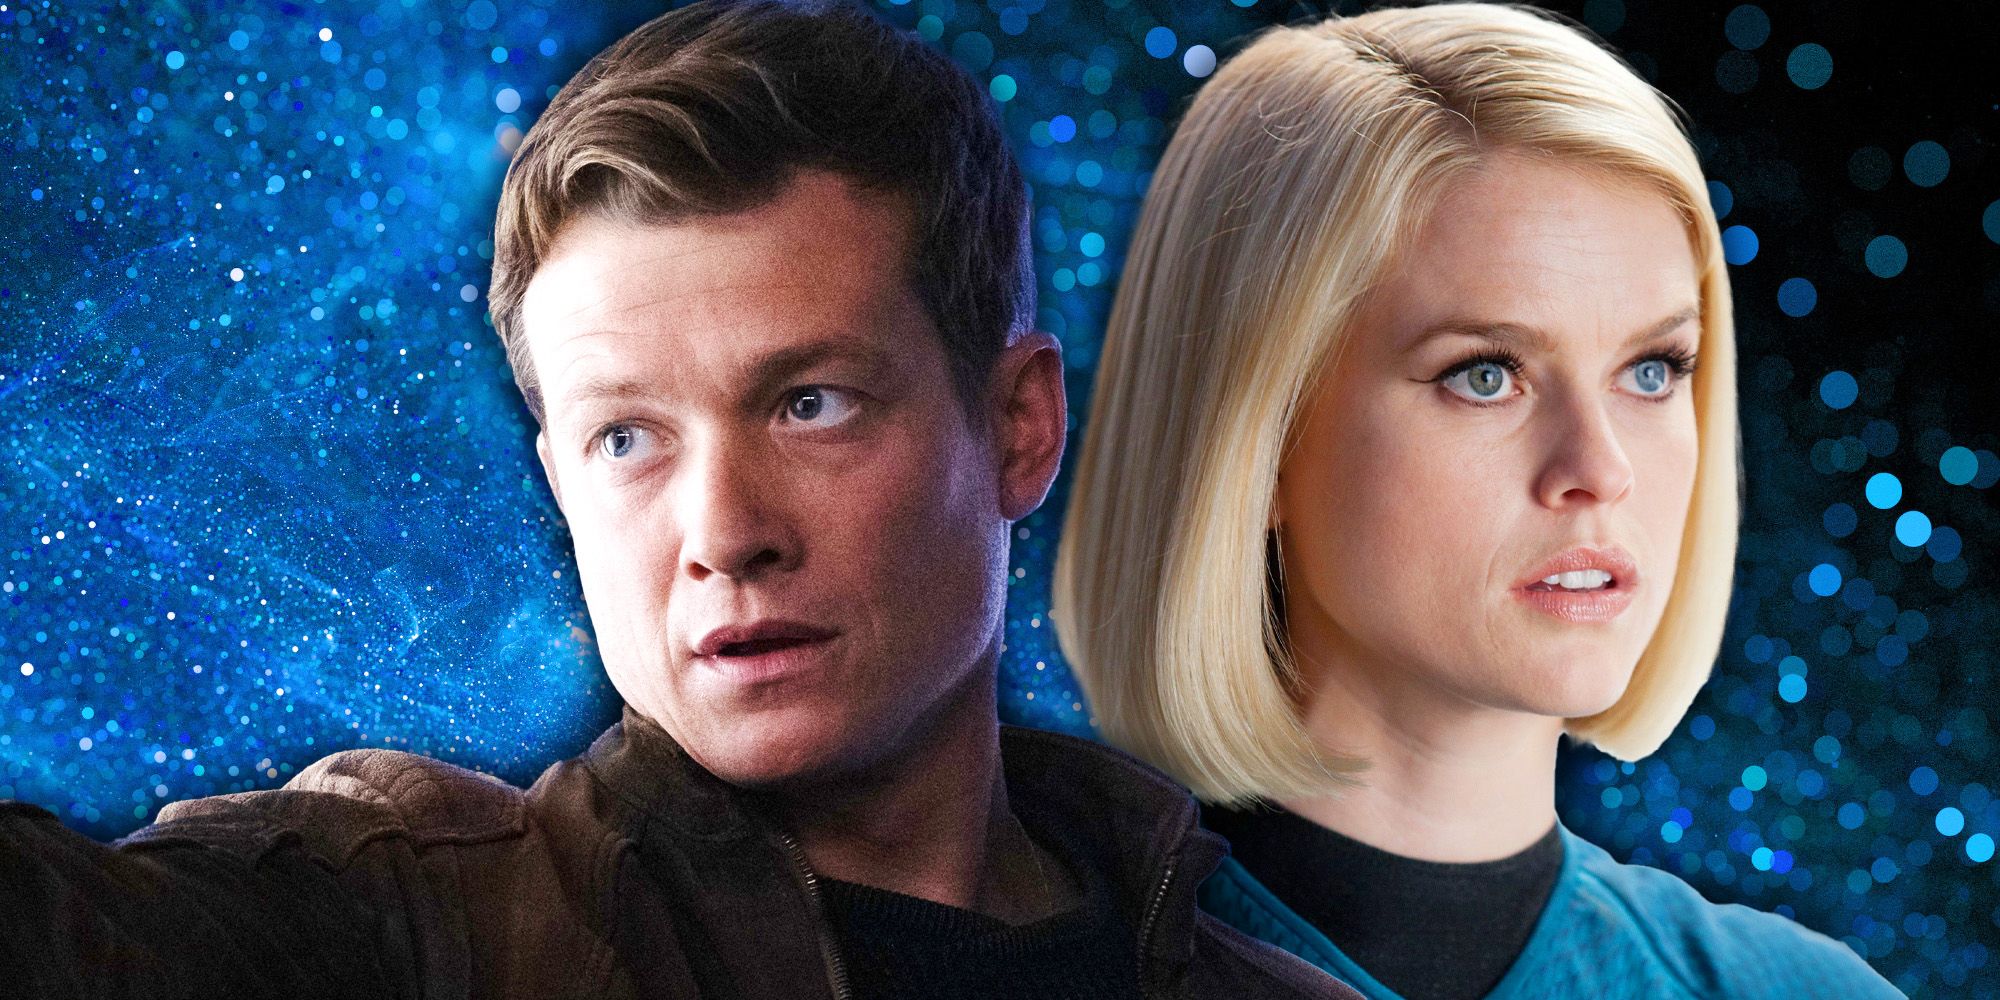 Carol Marcus (Alice Eve) from Star Trek Into Darkness and Jack Crusher (Ed Speleers) from Star Trek- Picard